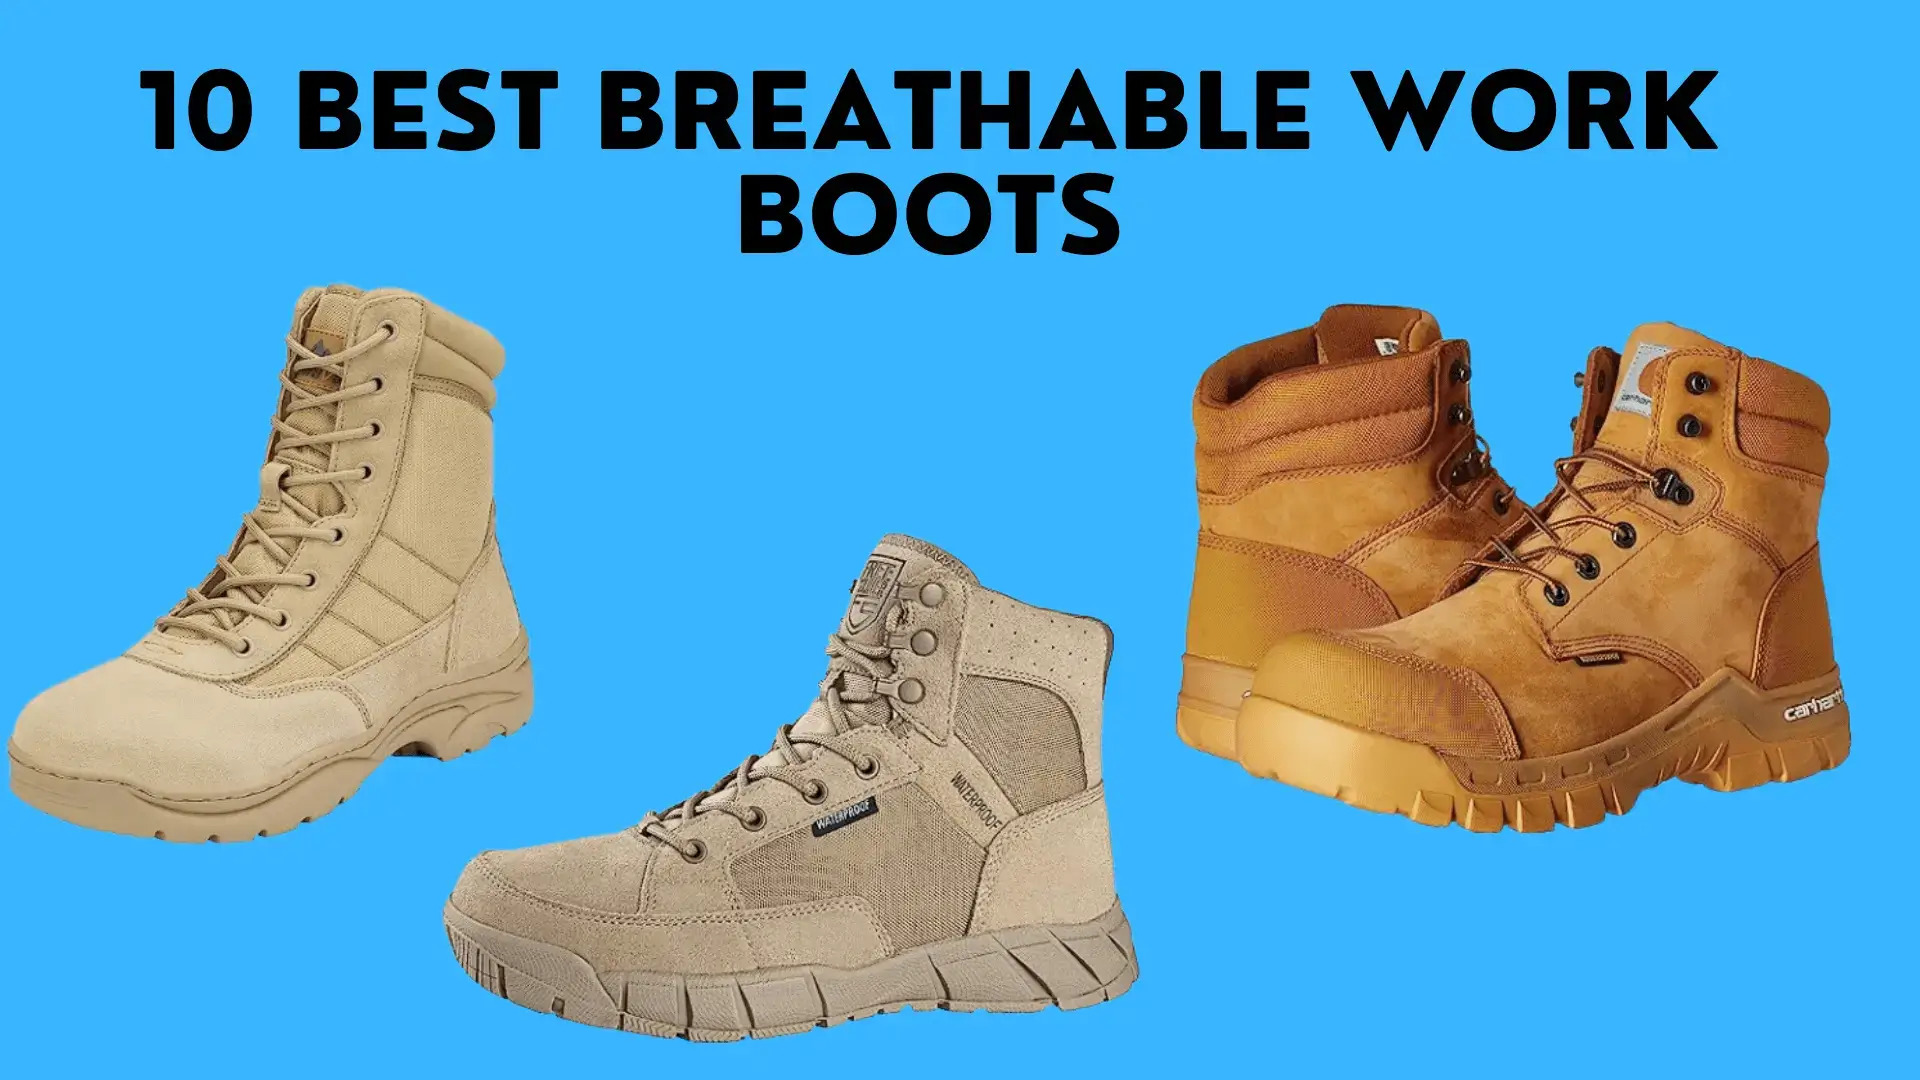 10 Best Breathable Work Boots